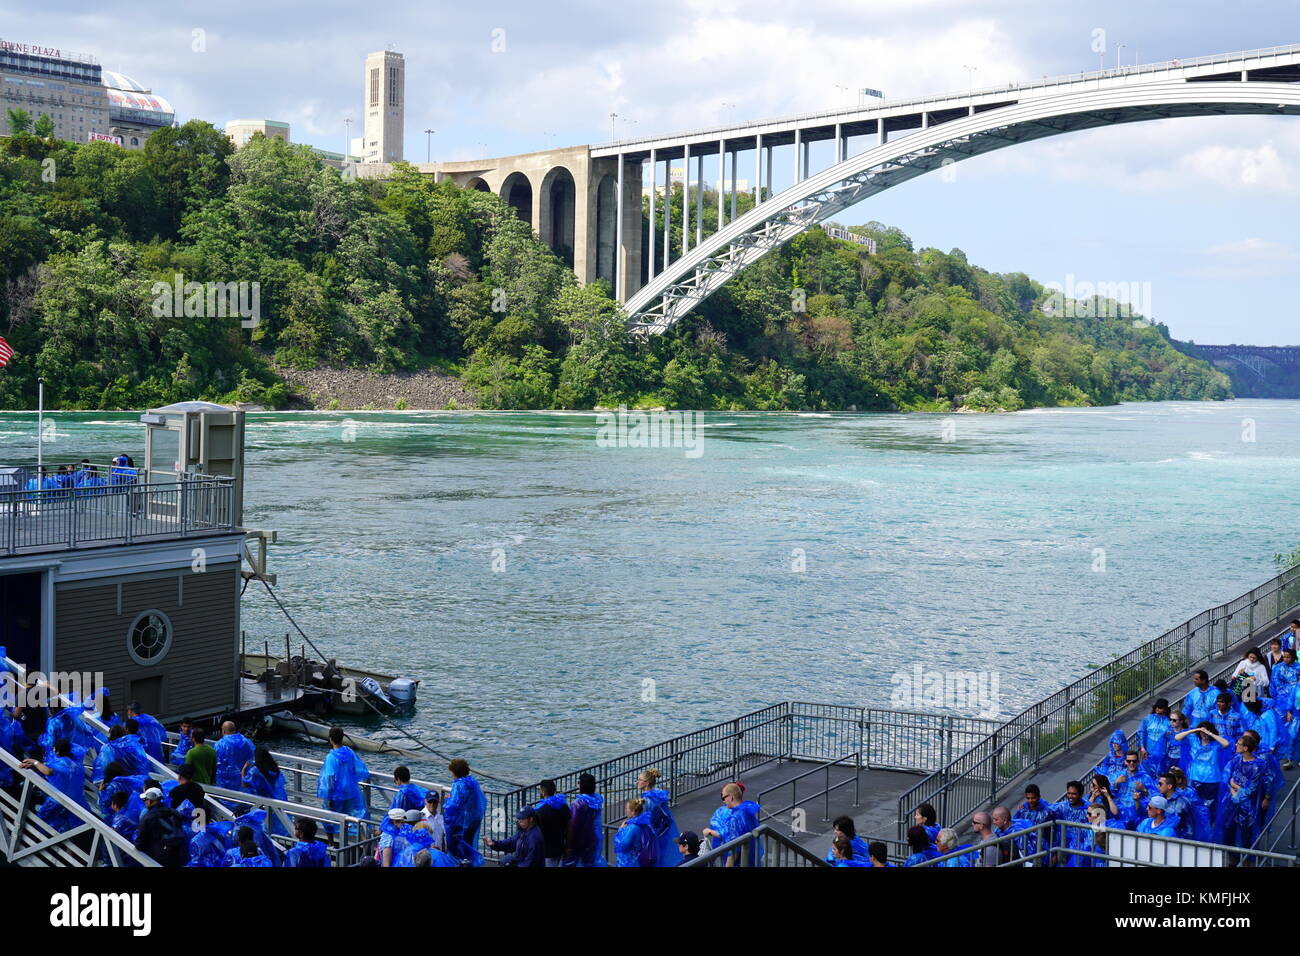 Visitors (tourists) boarding the Maid of the Mist ferry boat at Niagara Falls, New York, USA Stock Photo